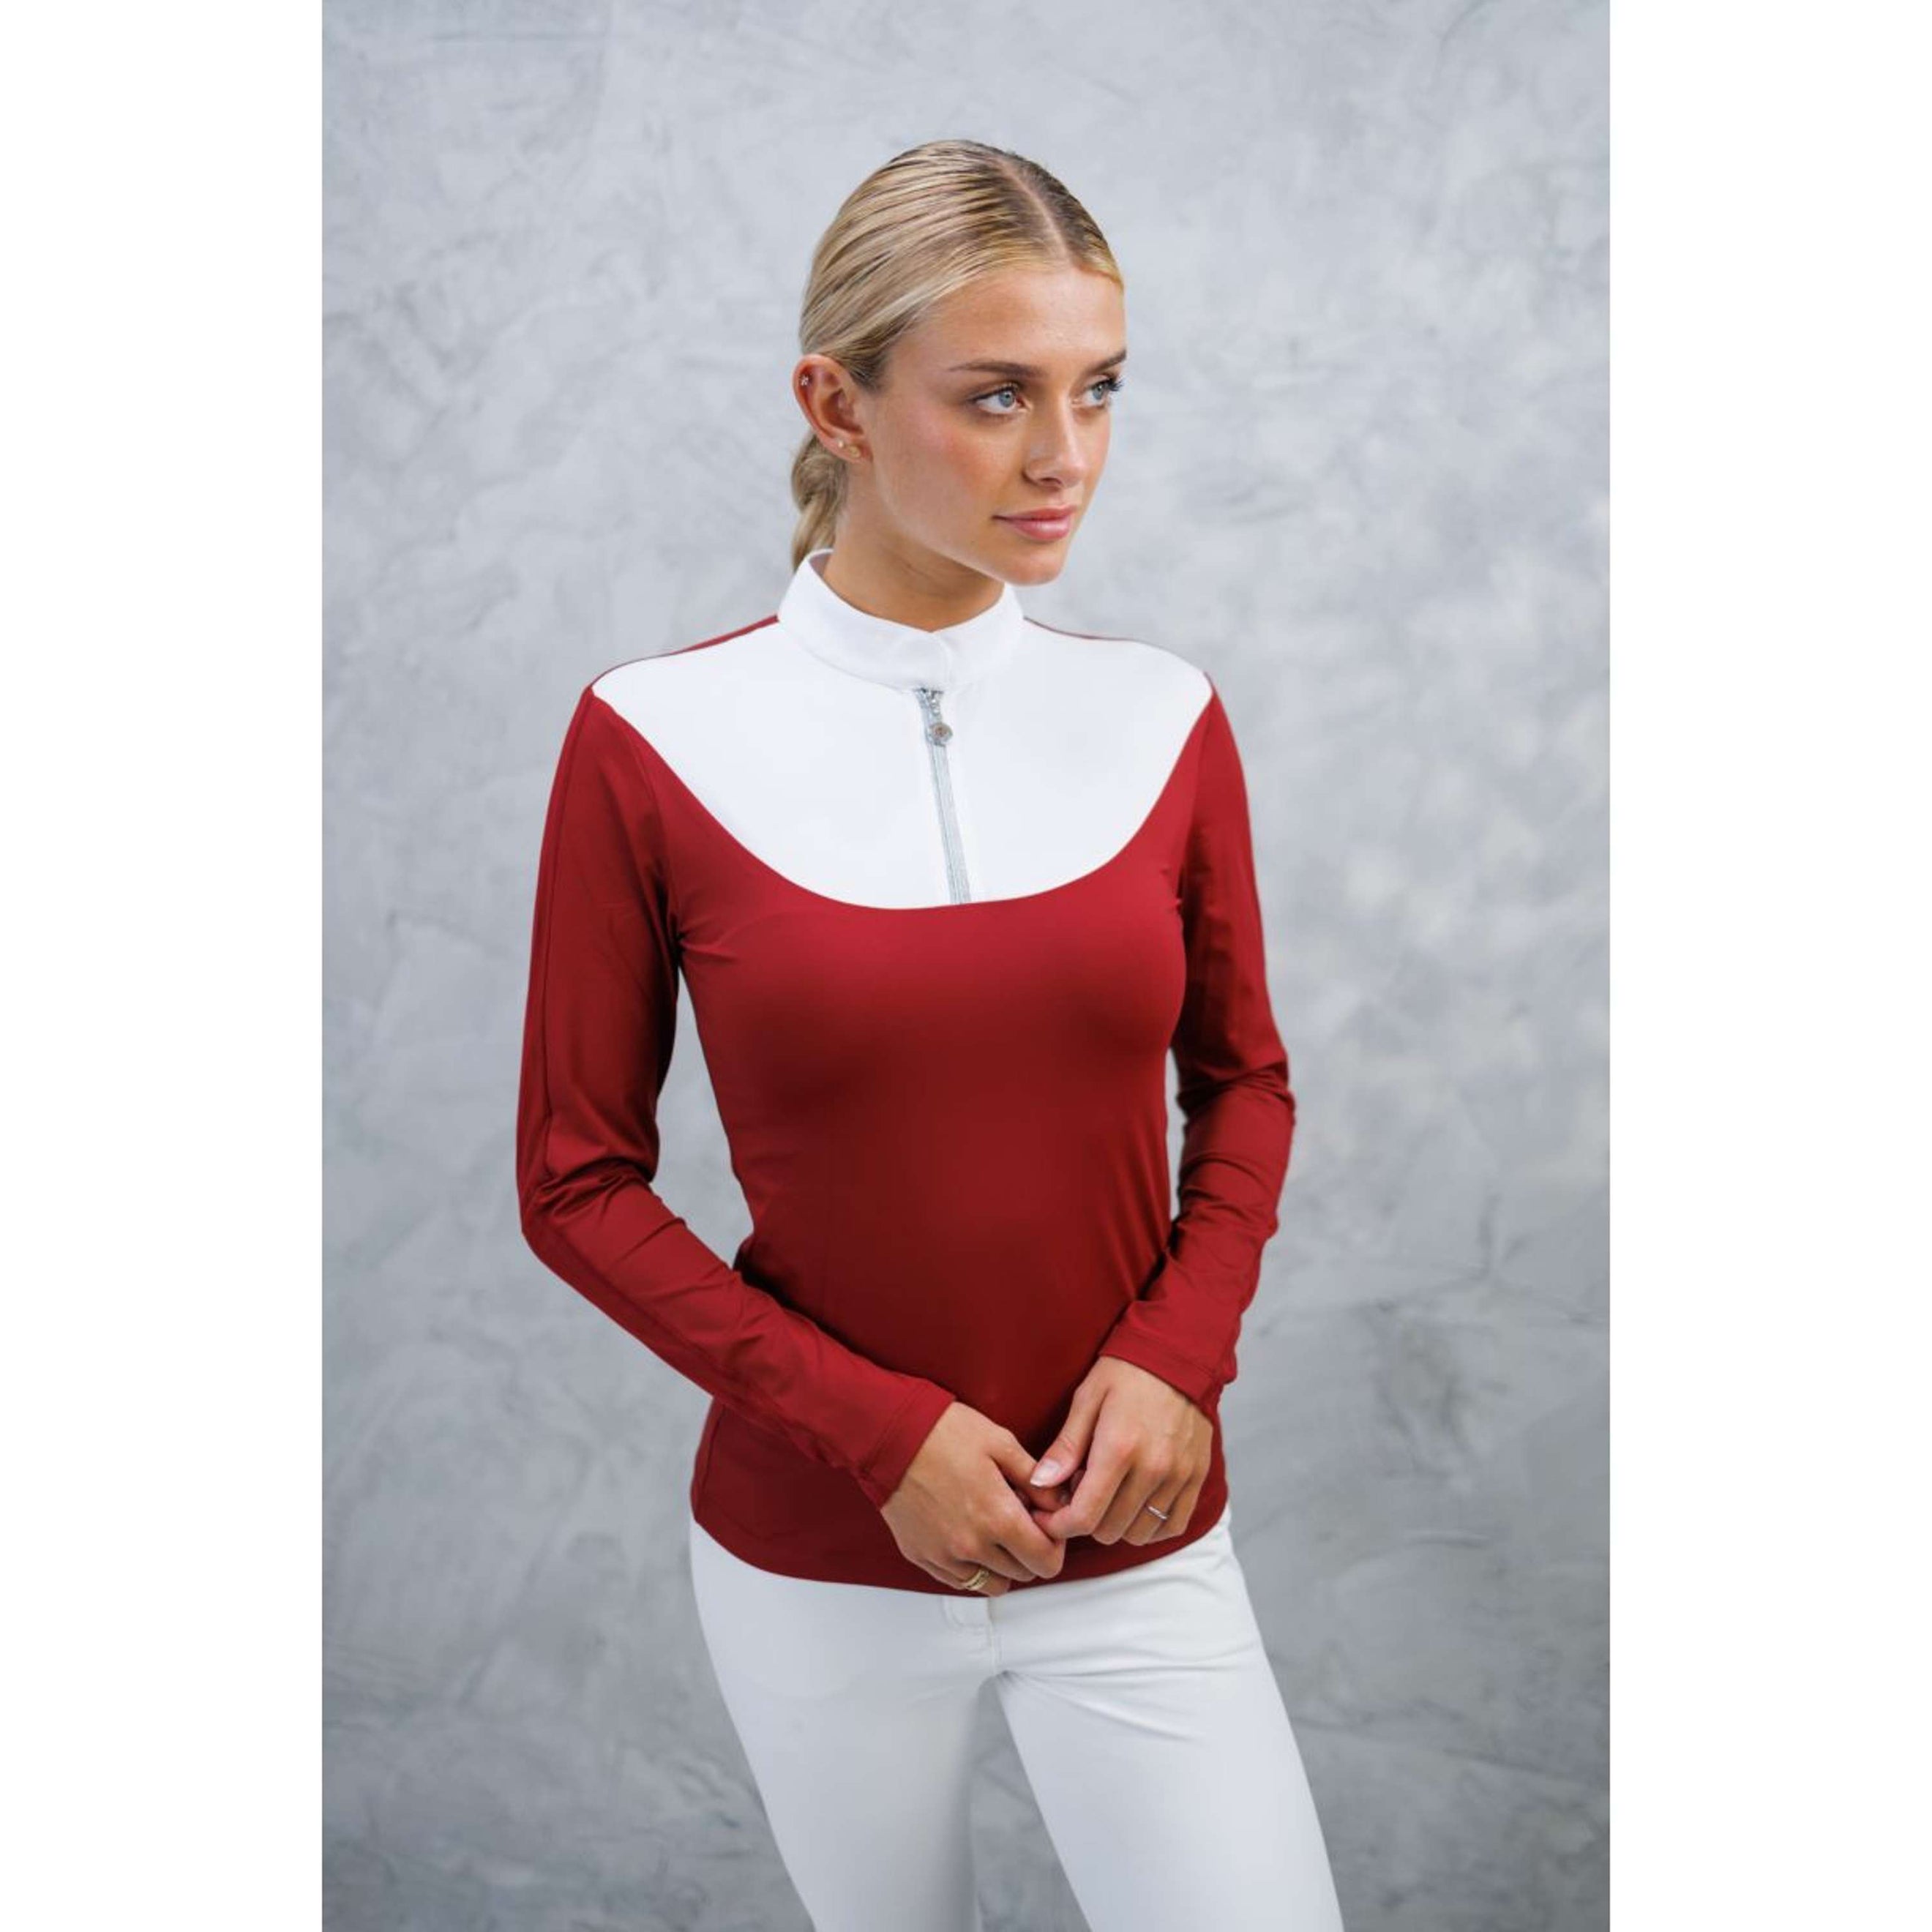 Harcour Wedstrijdshirt Coquette Longues Manches Rouge Rubis